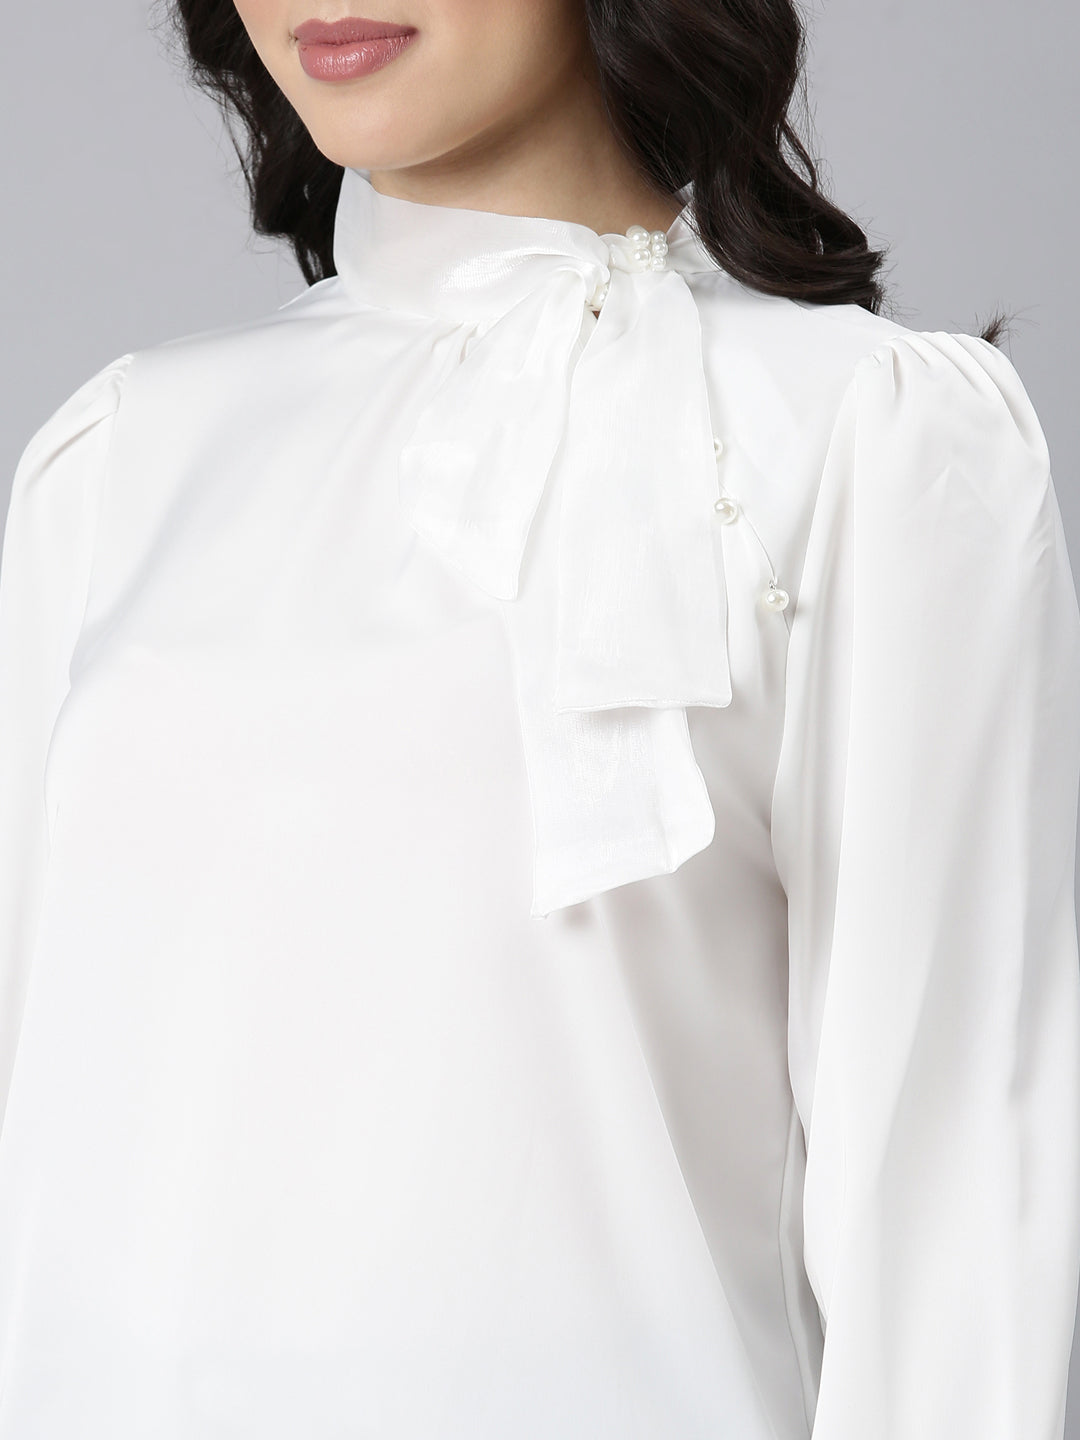 Women Solid Shirt Style White Top